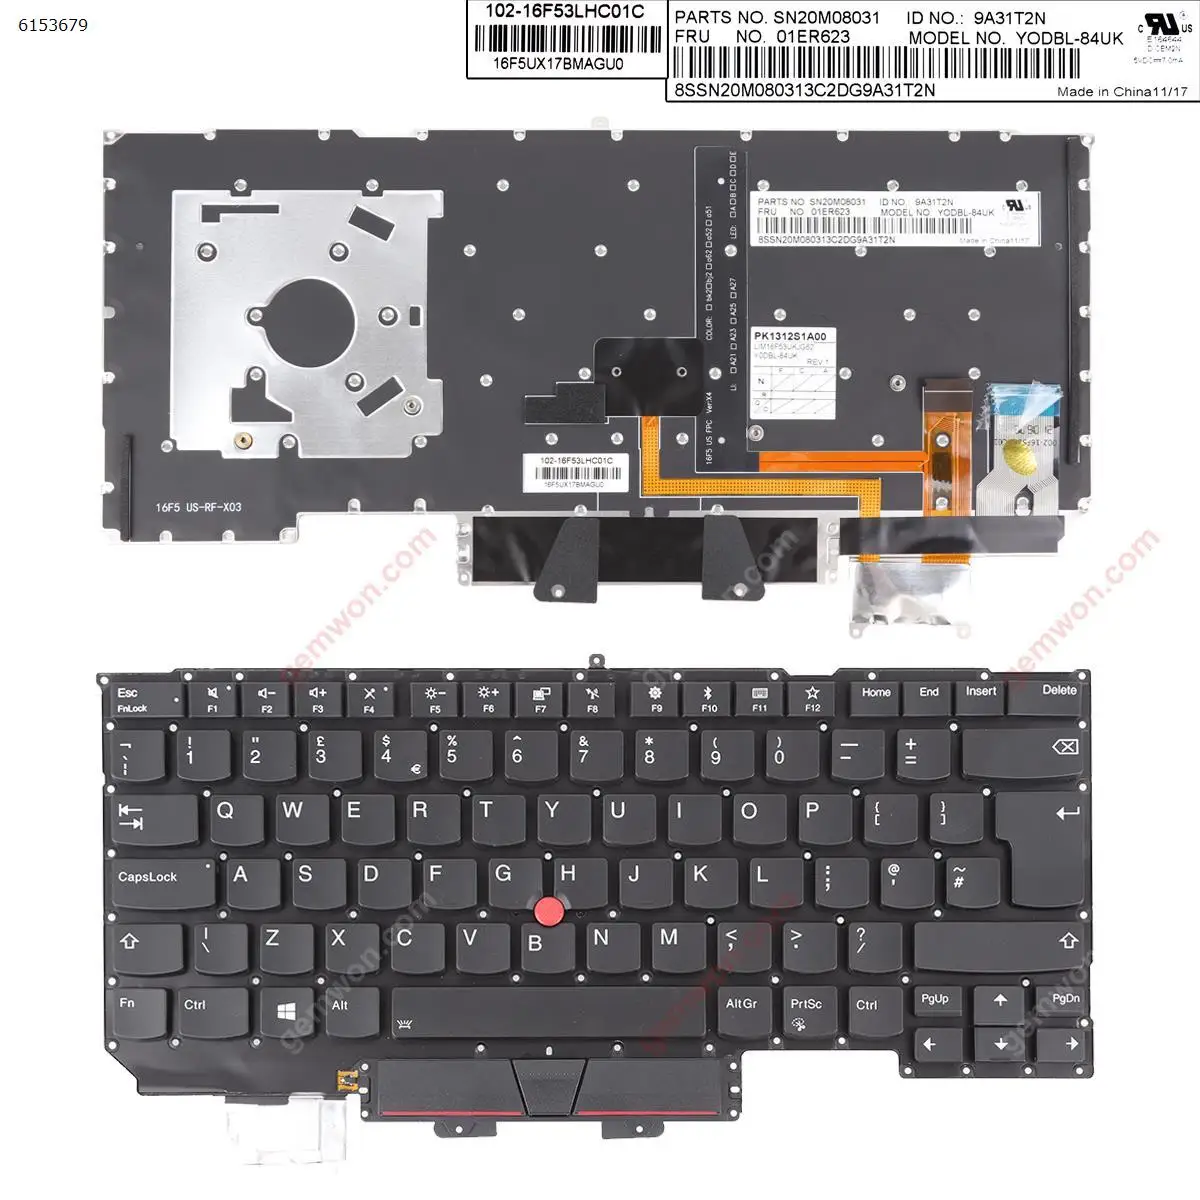 

UK Laptop Keyboard for Lenovo ThinkPad X1 Carbon Gen 5 2017 with Backlit & Point Stick